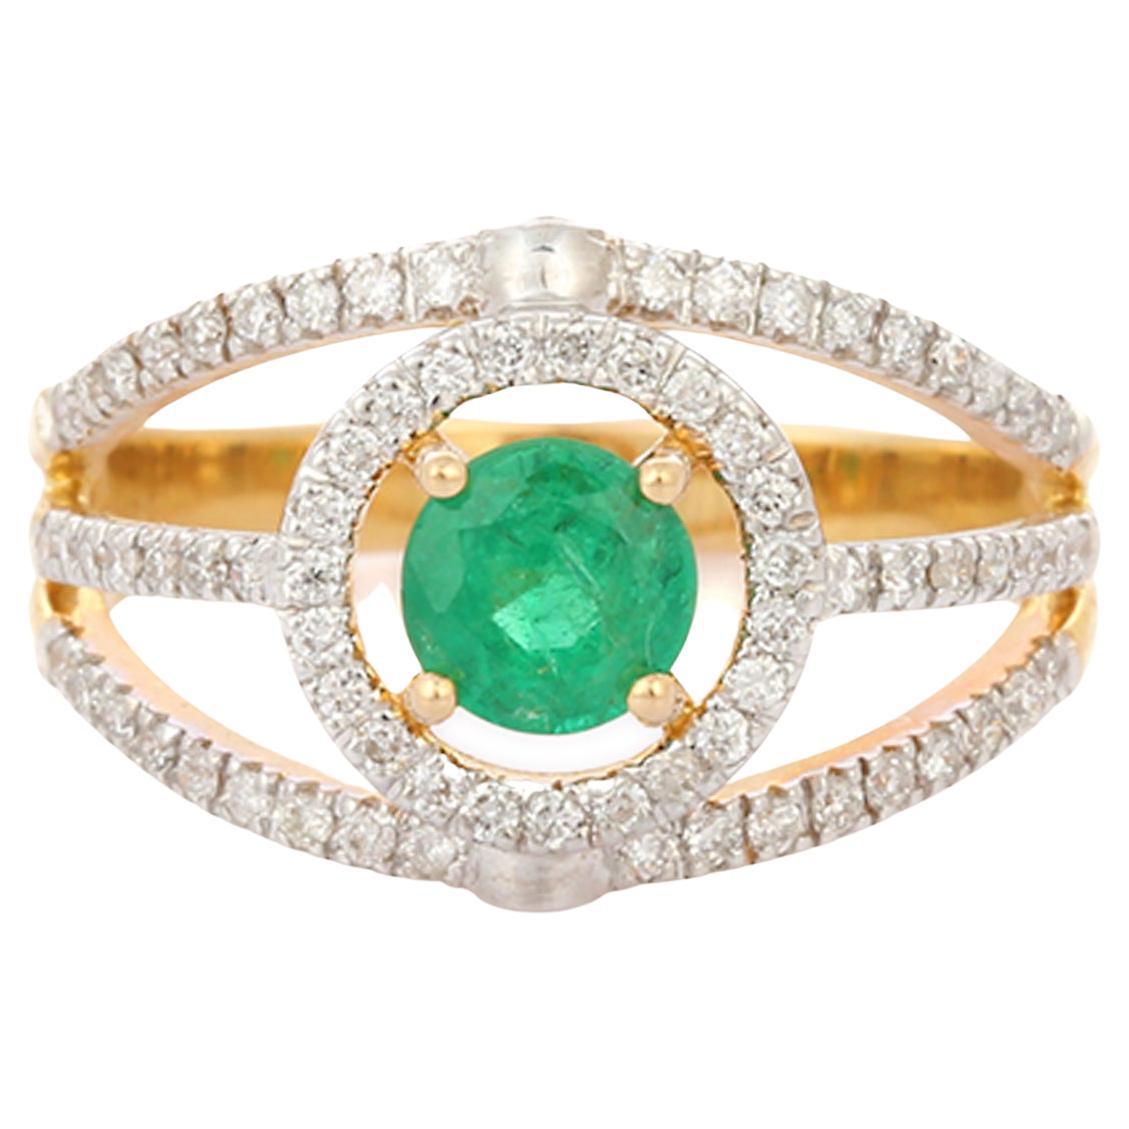 For Sale:  18K Yellow Gold Brilliant Cut Round Emerald and Diamond Studded Wedding Ring